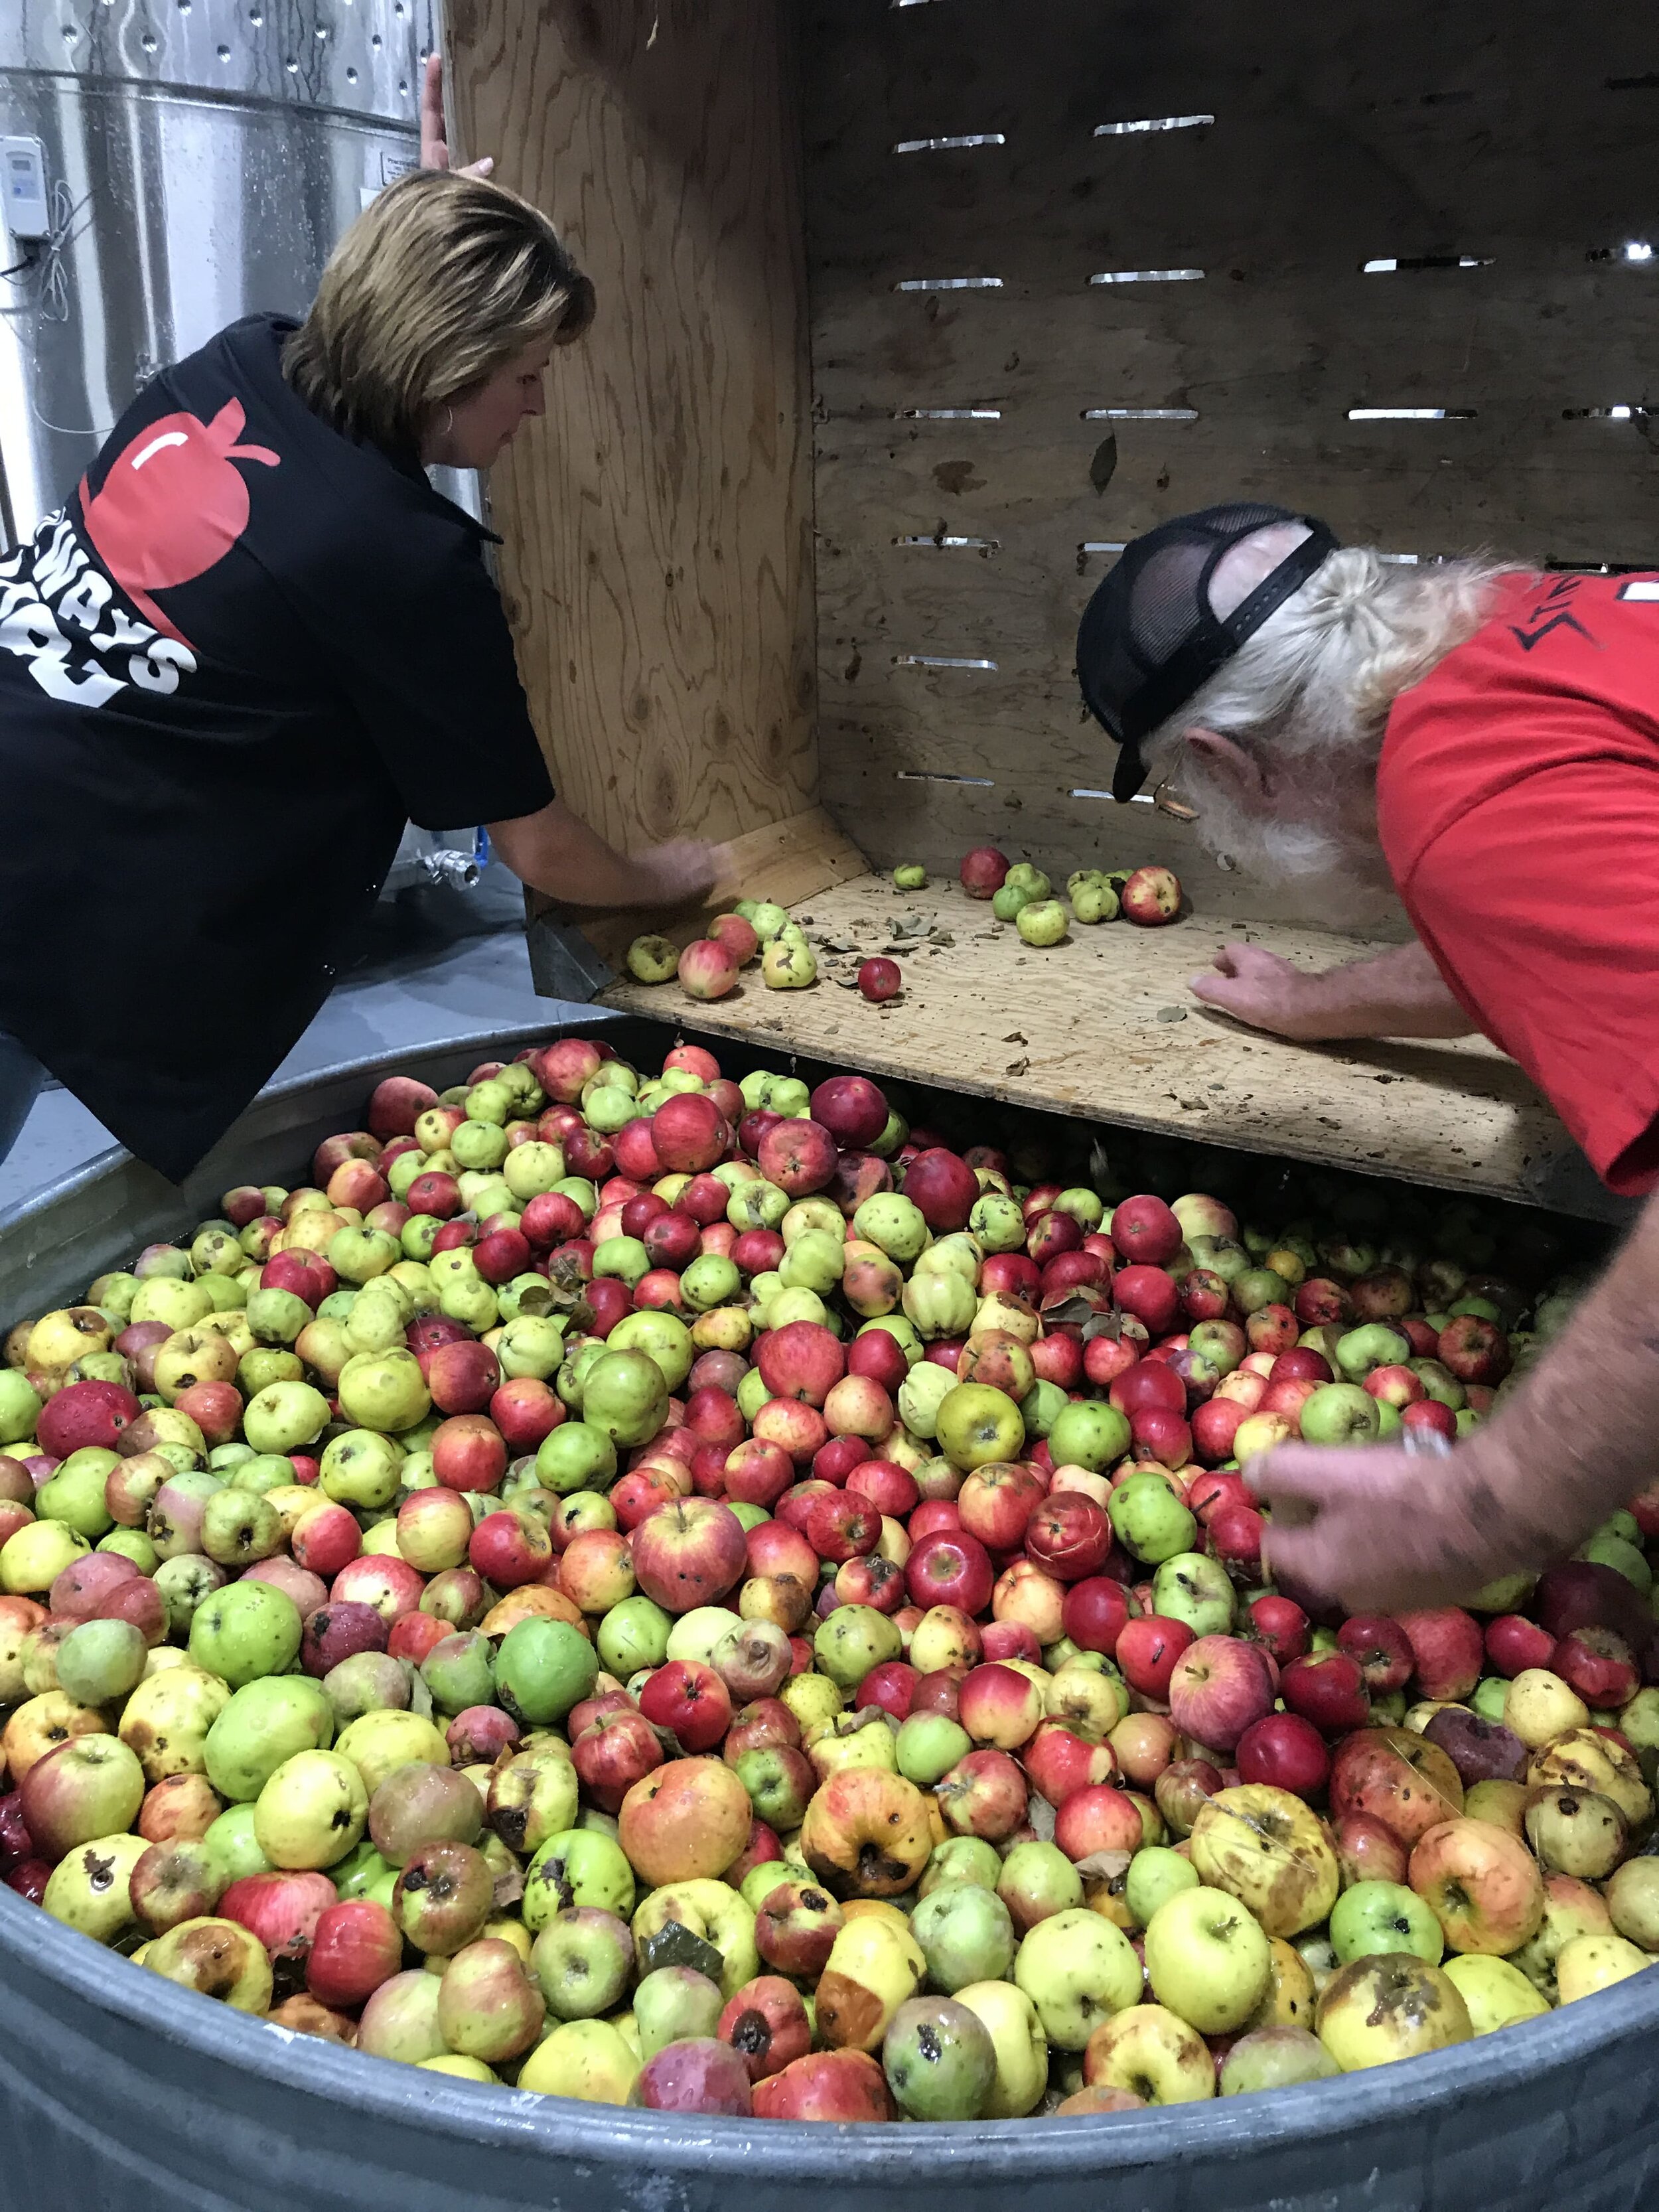 Lynda cleaning apples with father in law Steve Parrish-min.JPG